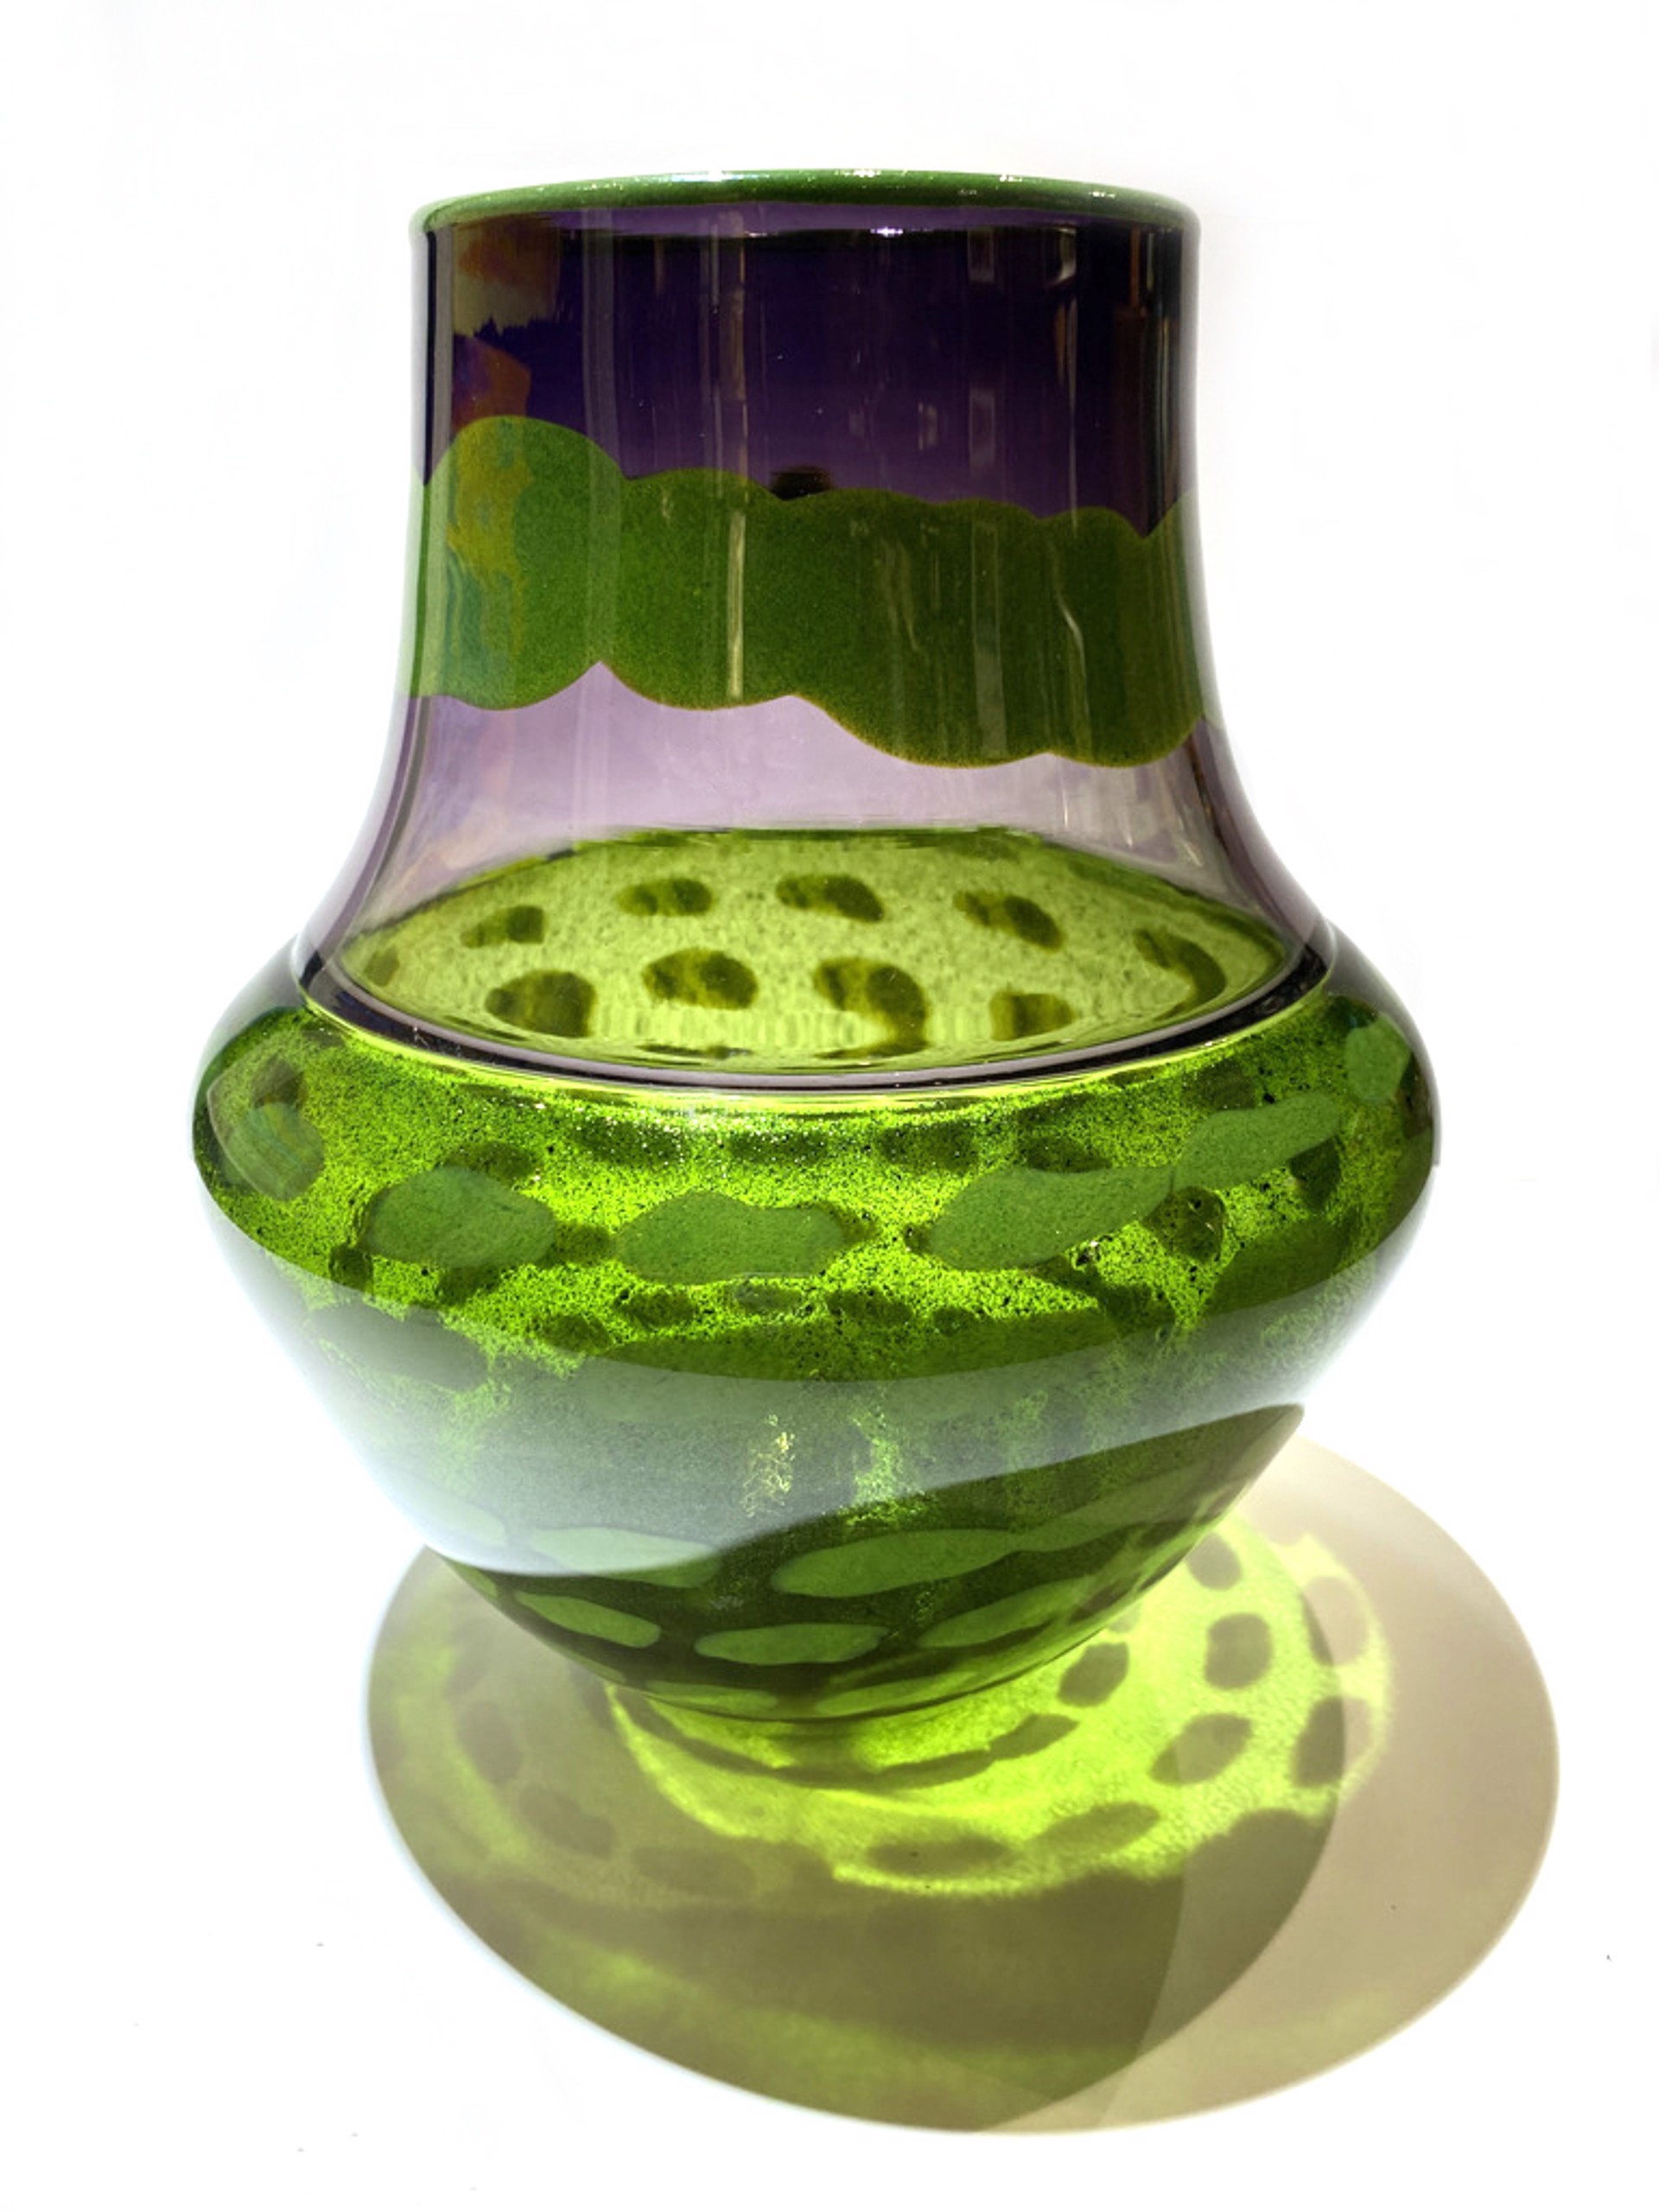 Green and Lavender Glass Vase by Daniel Wooddell